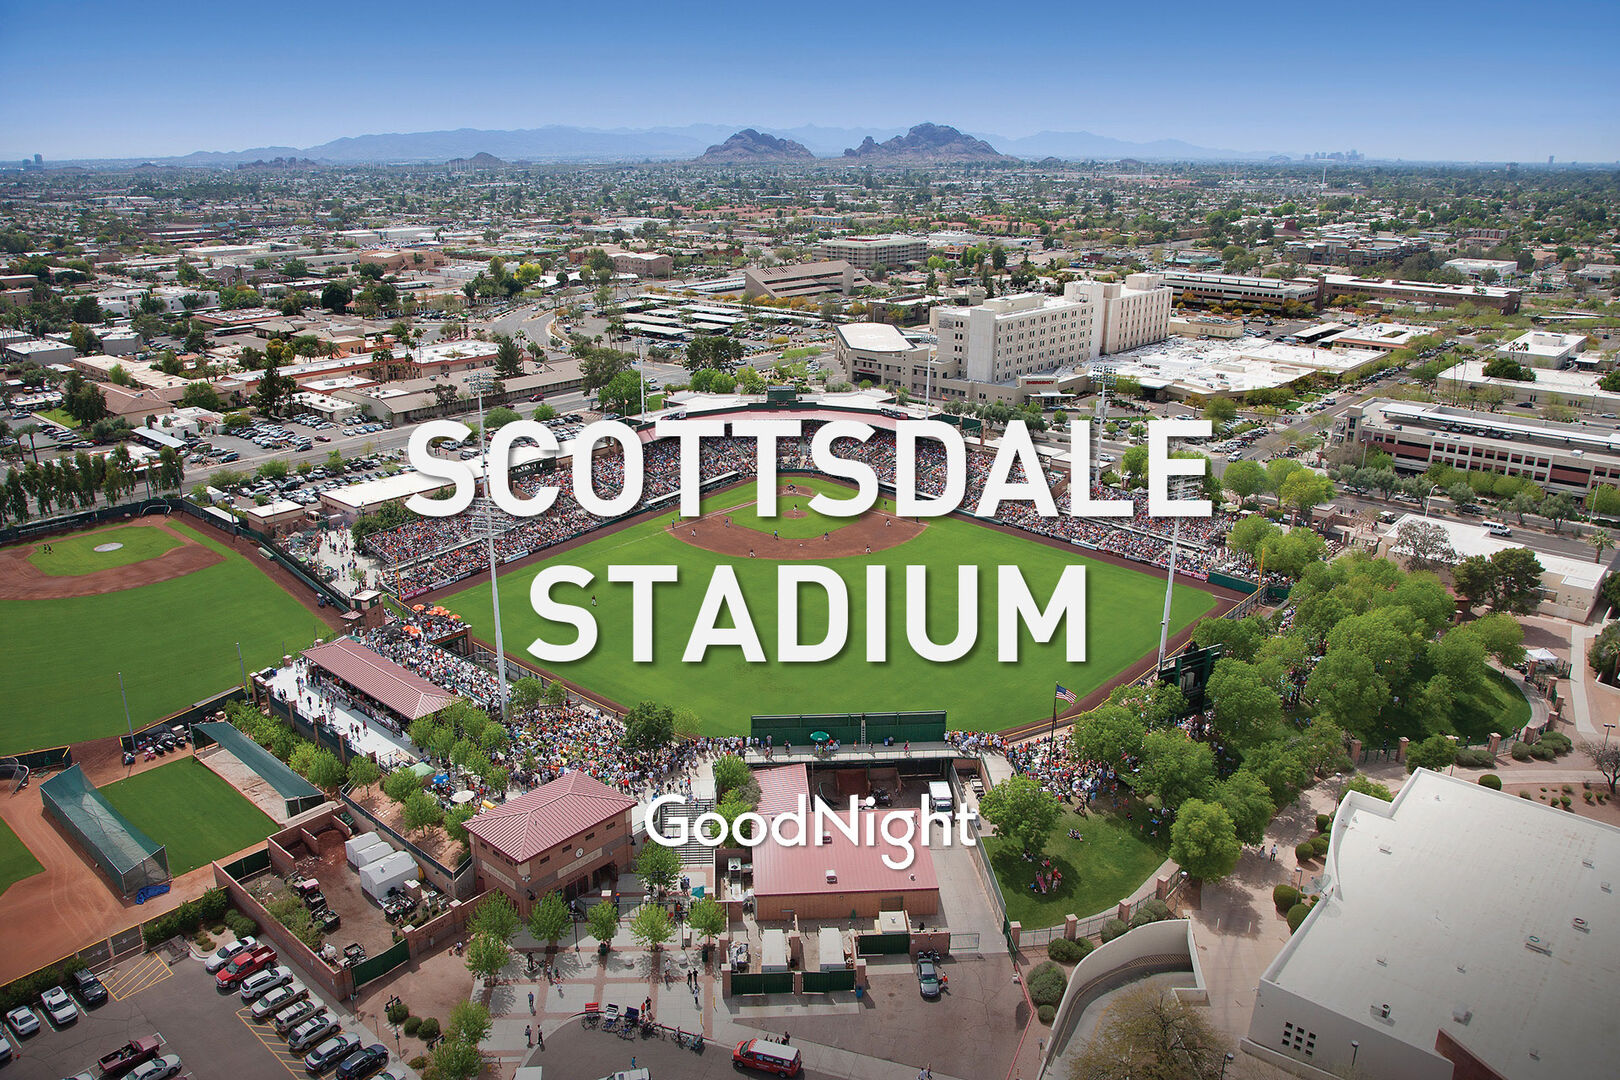 Scottsdale Stadium - Home of the San Francisco Giants during Spring Training 2023: 2 min